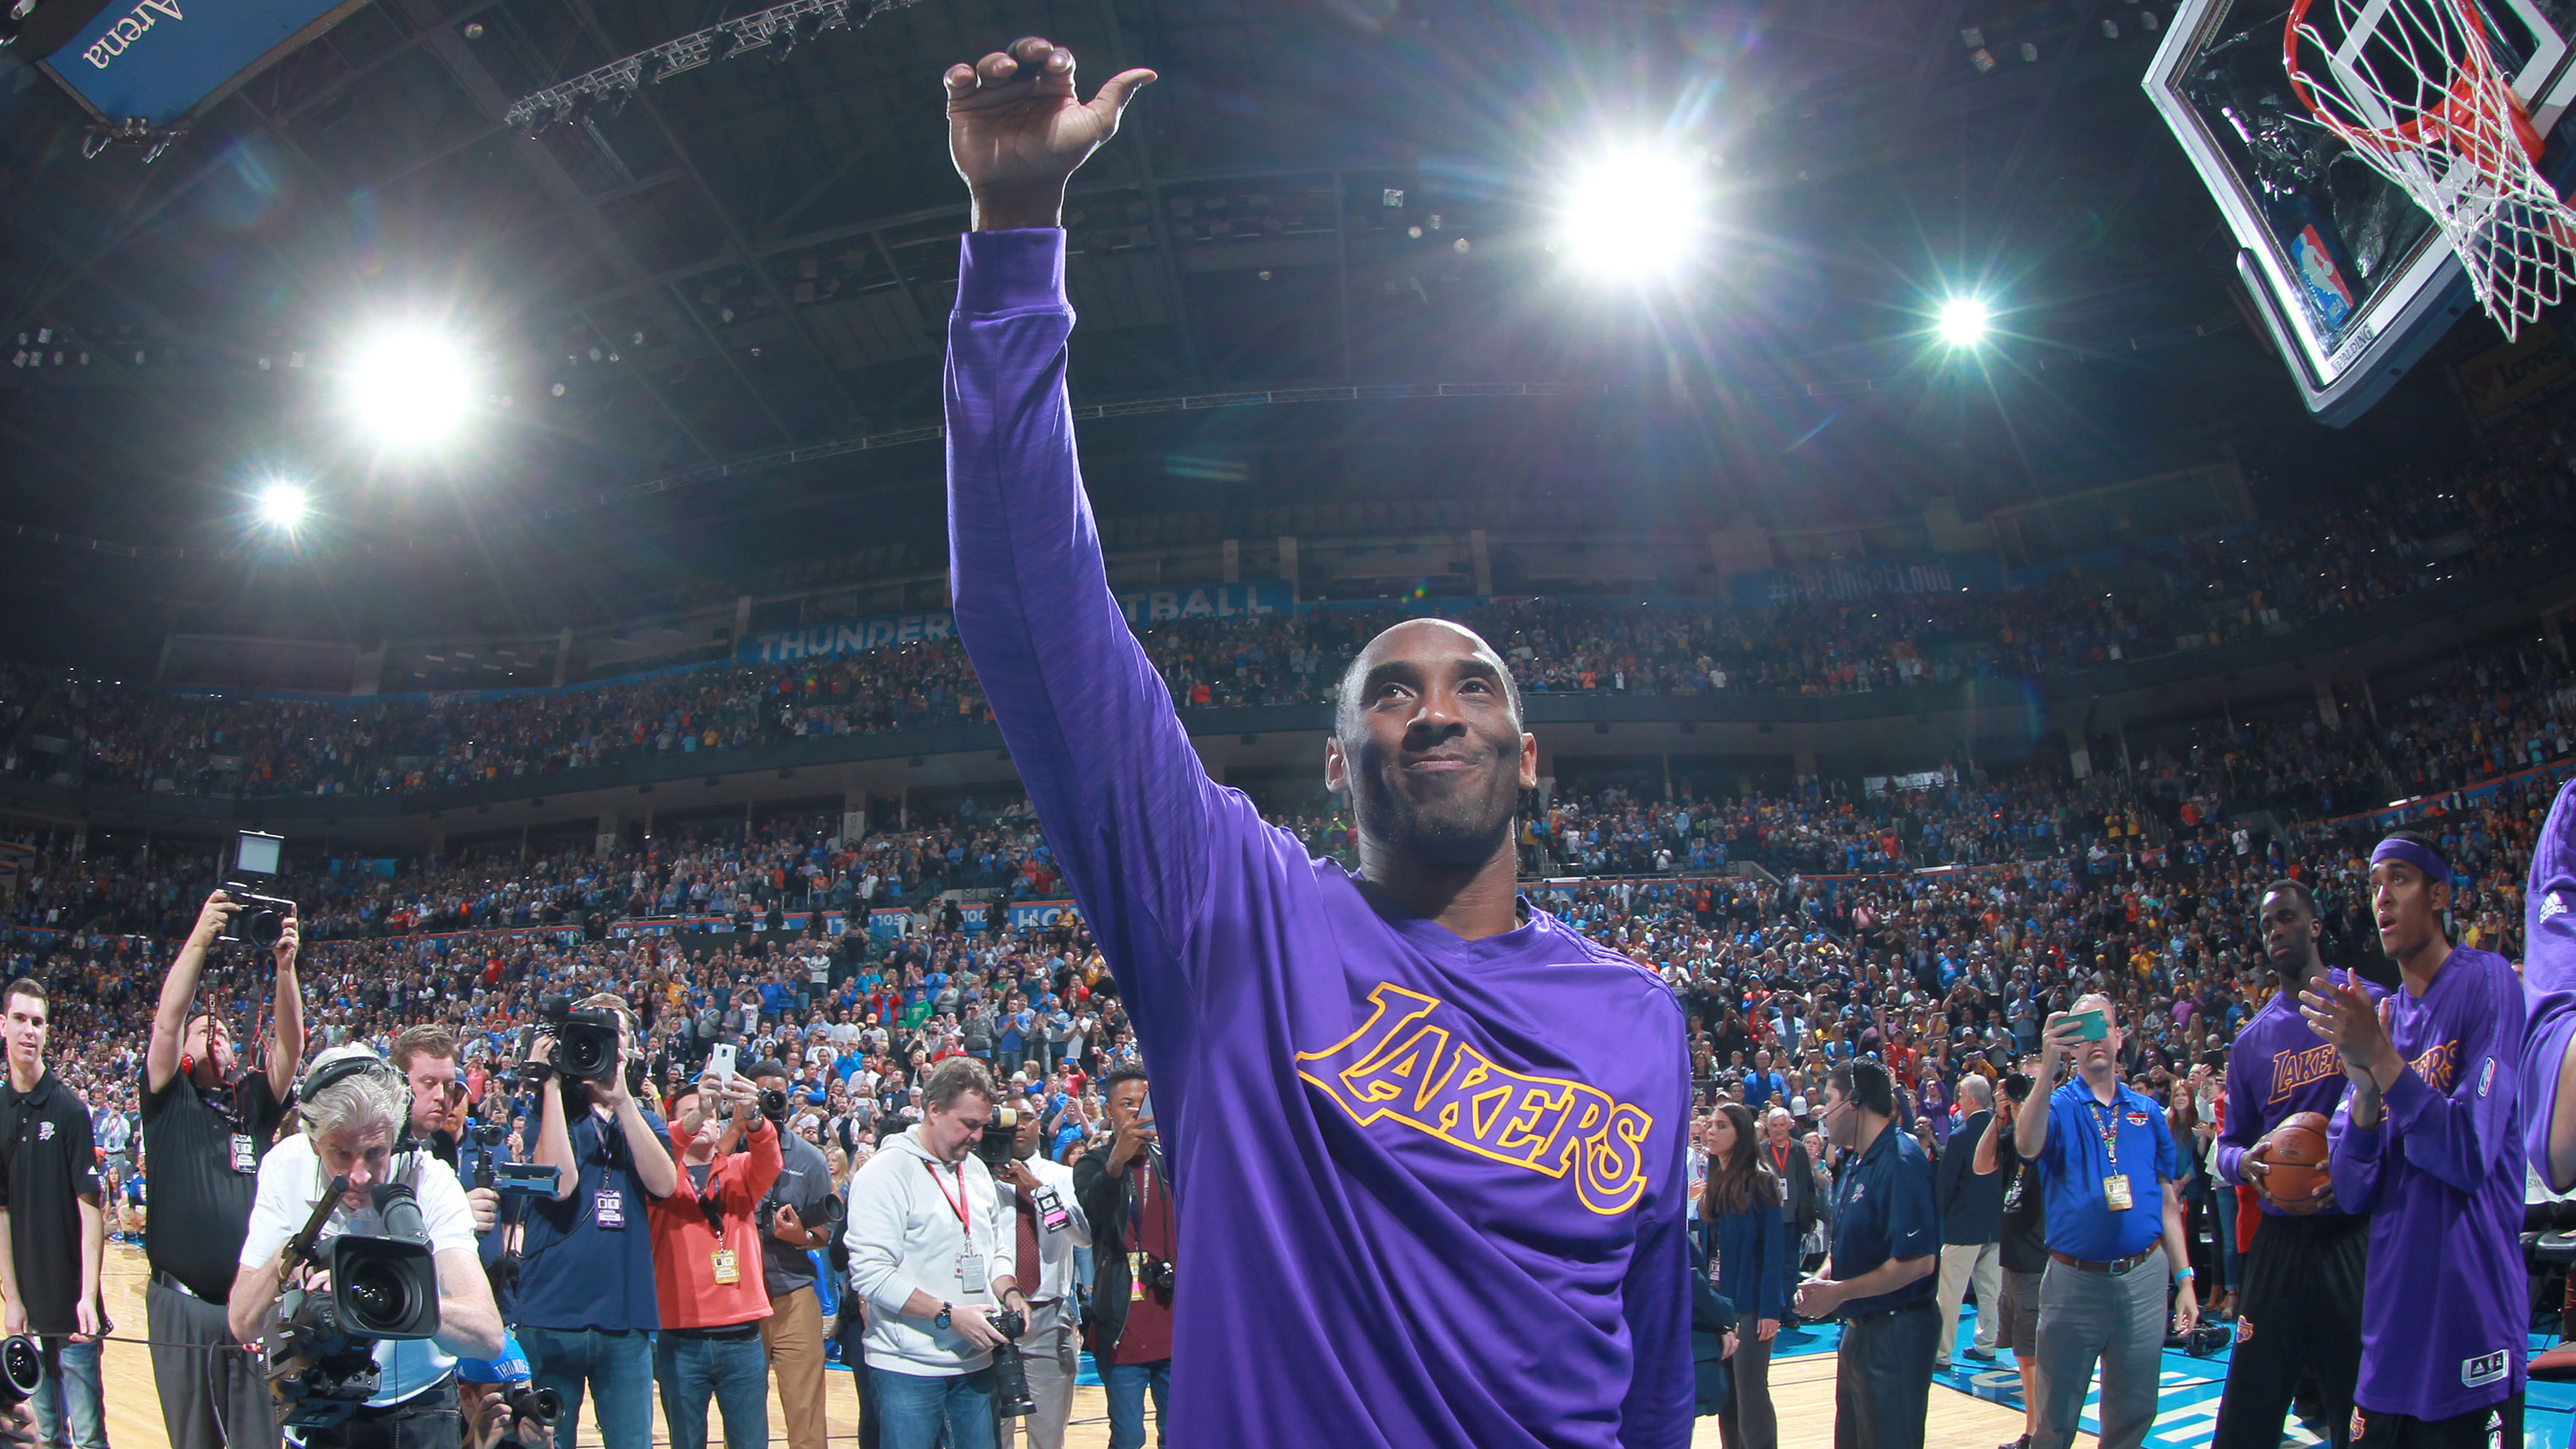 NBA 2K24 Celebrates the Legendary Kobe Bryant as this Year's Cover Athlete  - Gadgets Middle East